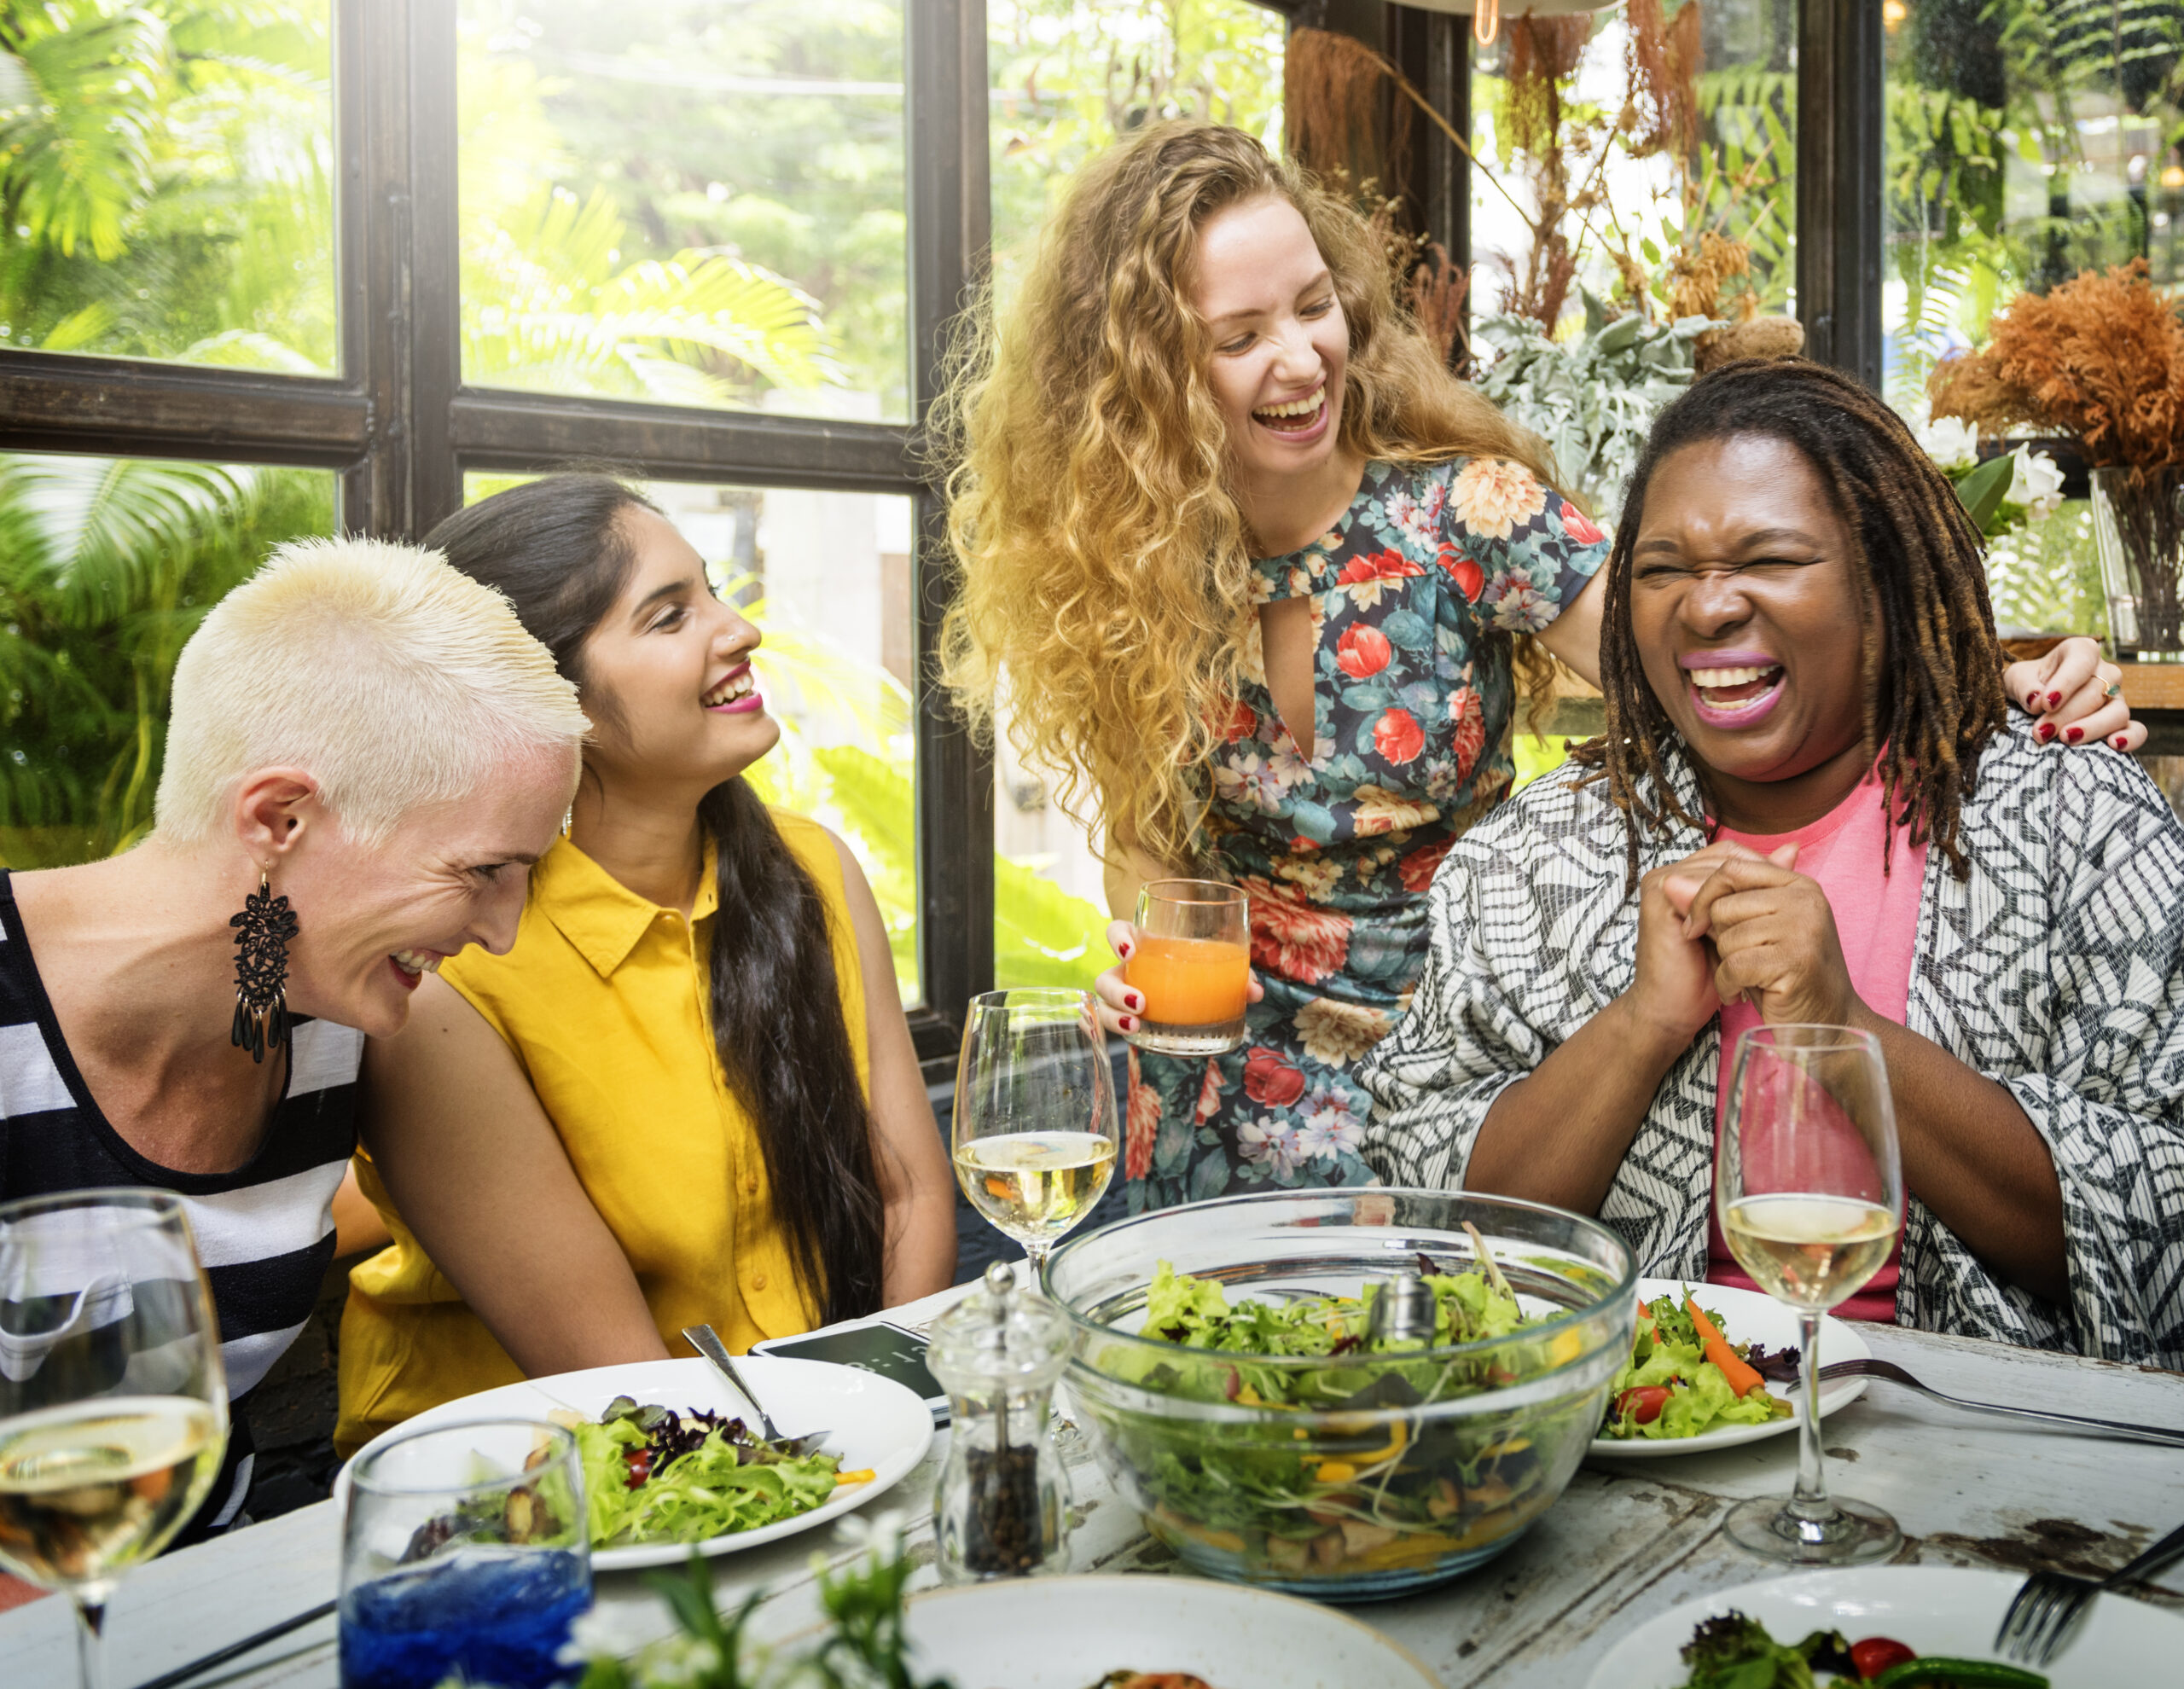 Group of Women Hanging Eating Together